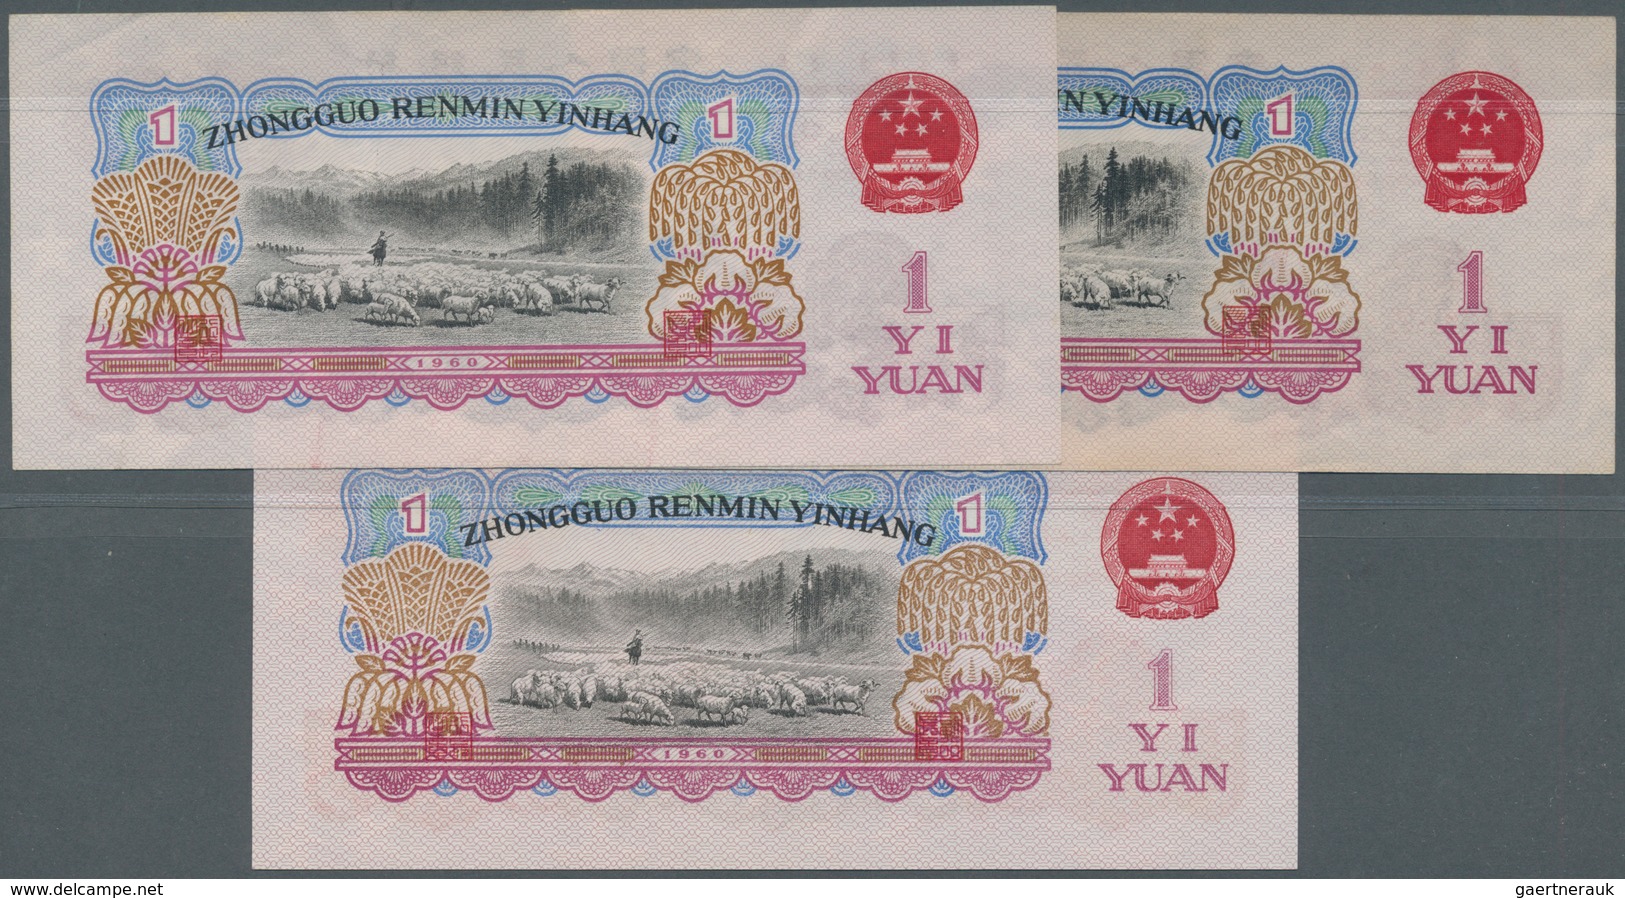 01303 China: Set Of 3 Notes 1 Yuan 1960 P. 874a, B, C In Condition: XF, AUNC And UNC. (3 Pcs) - China